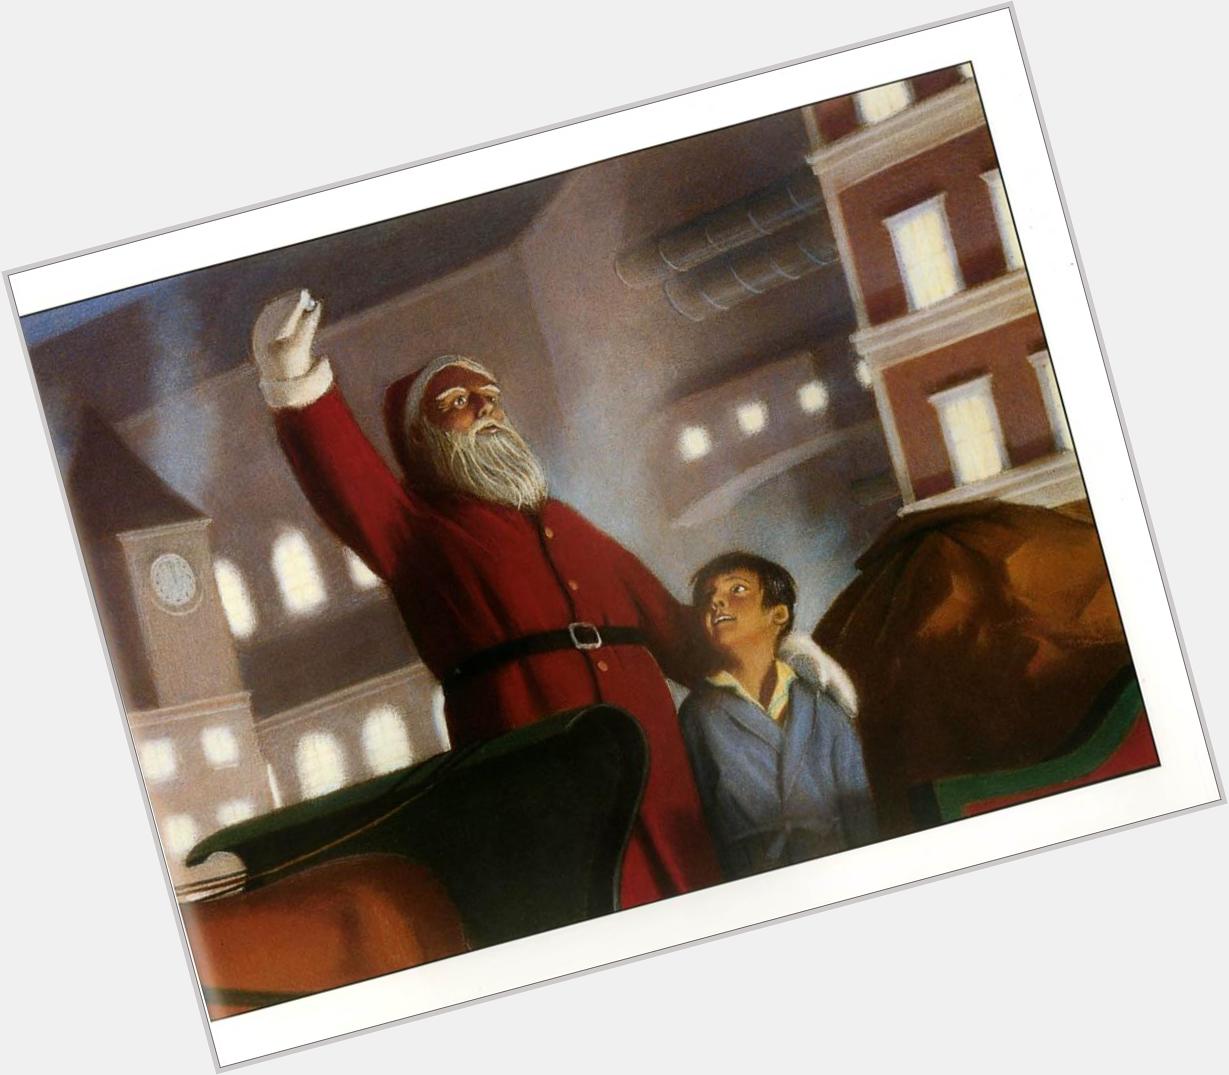 Happy birthday to Chris Van Allsburg!! The Polar Express is one of my must reads during the holidays. 